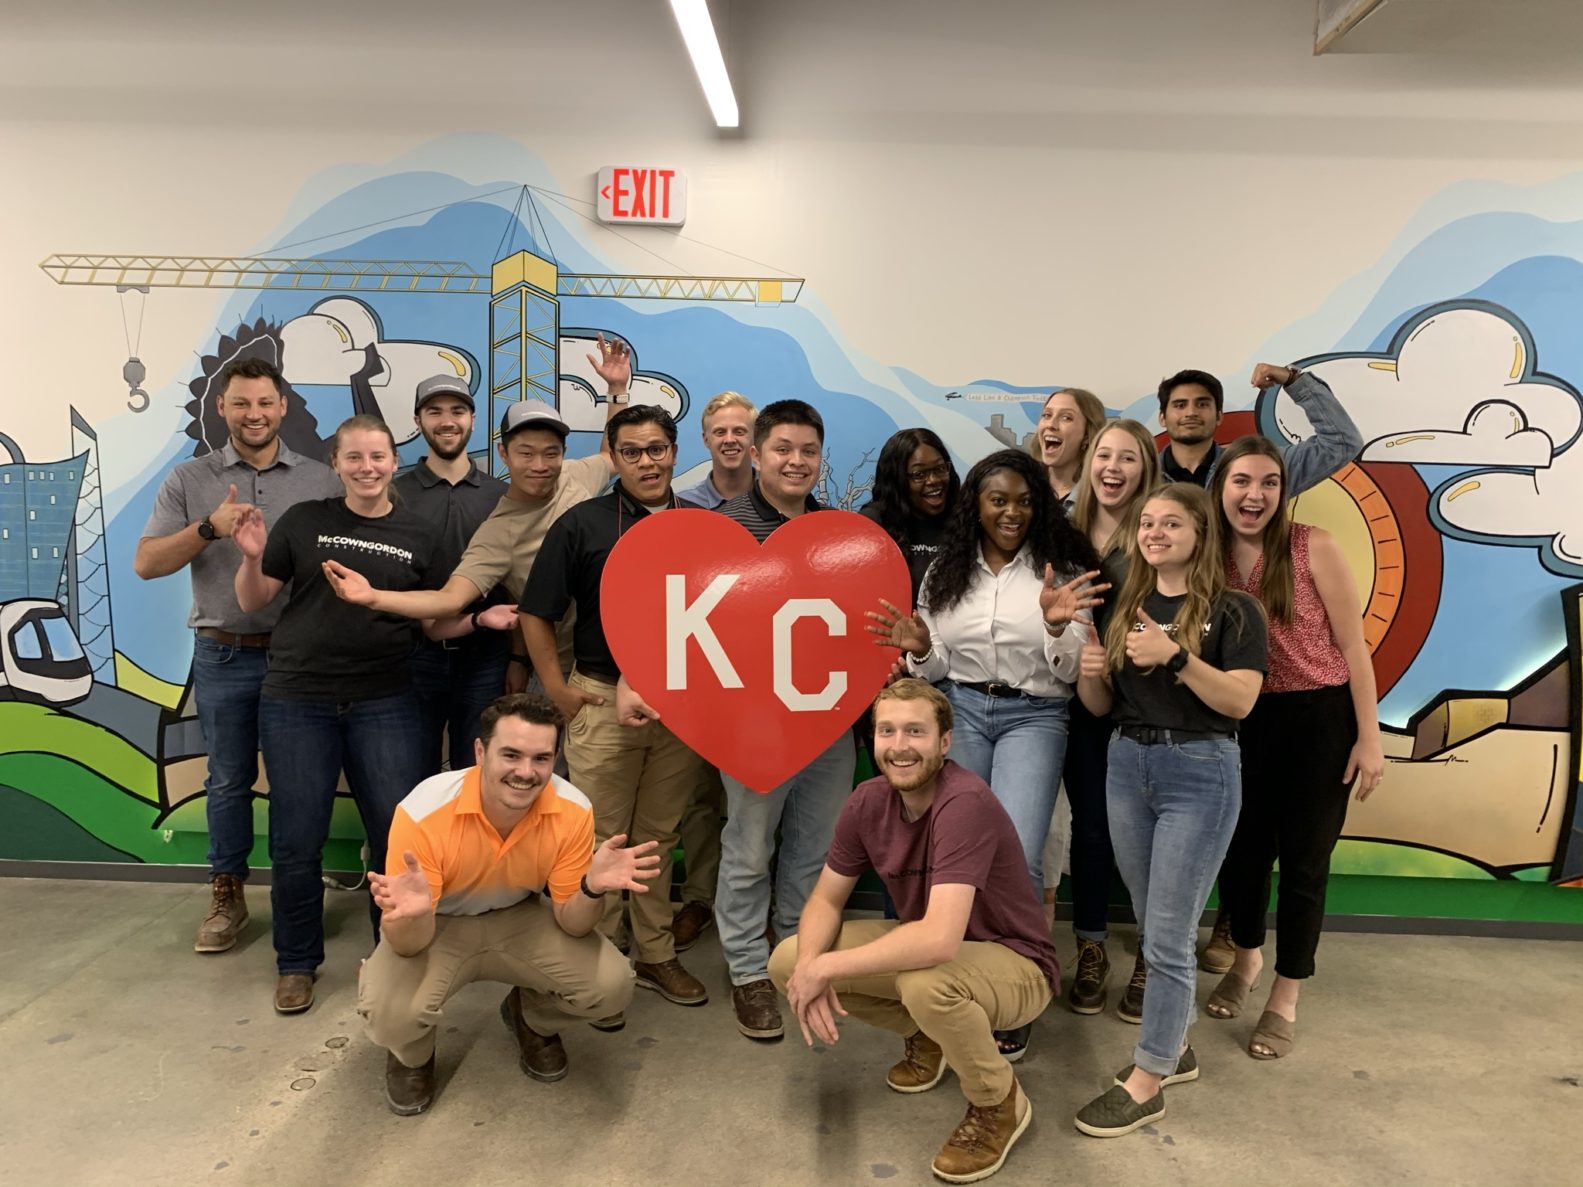 Group photo of McCownGordon interns at the KC office